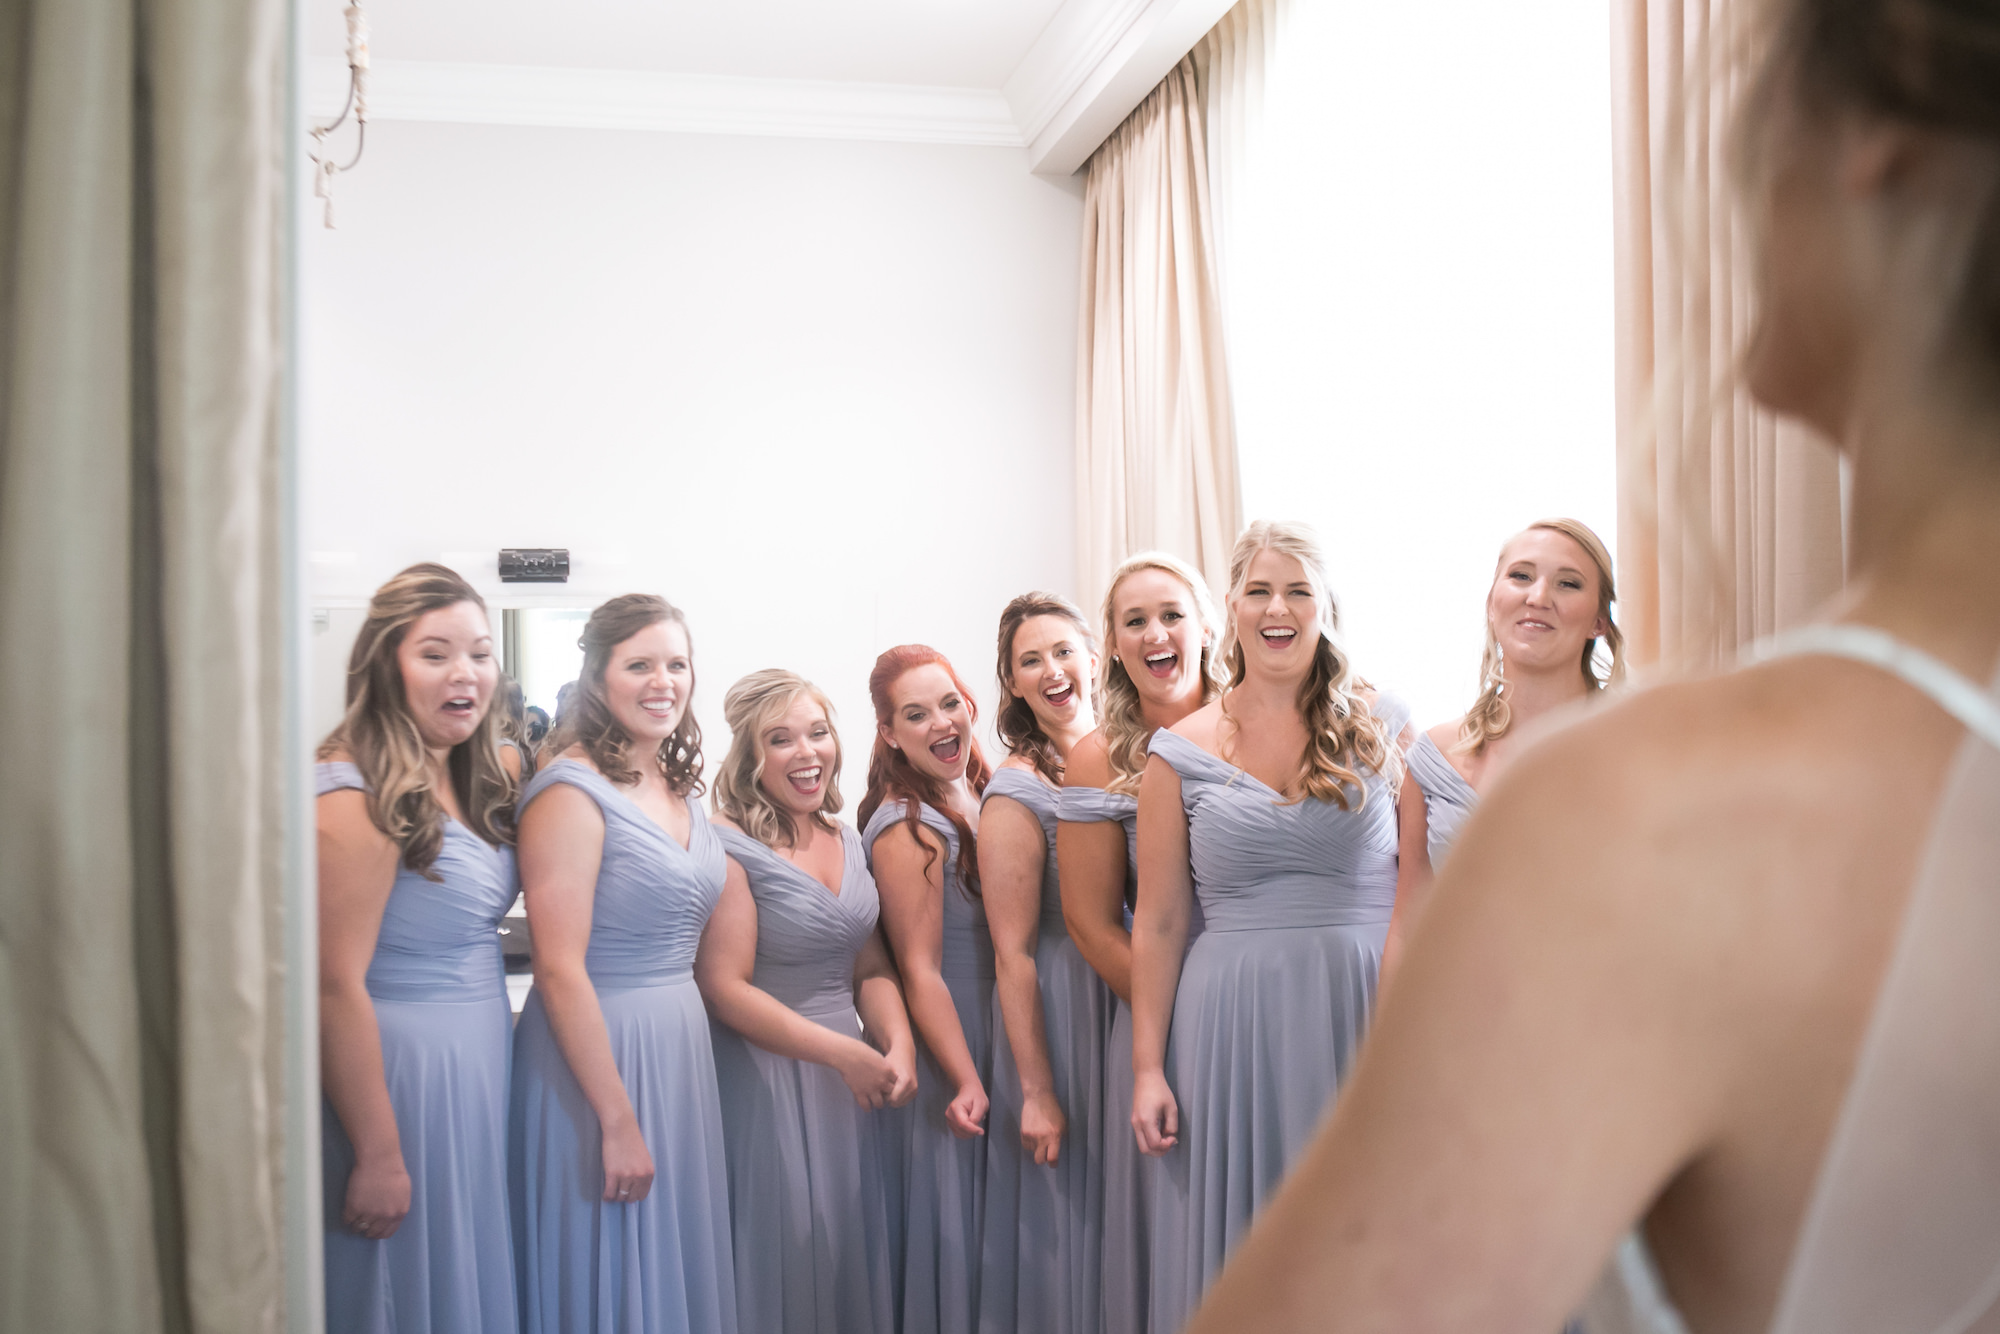 Bridesmaids in Matching Dusty Blue Dresses First Look Wedding Portrait with Bride | Tampa Bay Wedding Photographer Carrie Wildes Photography